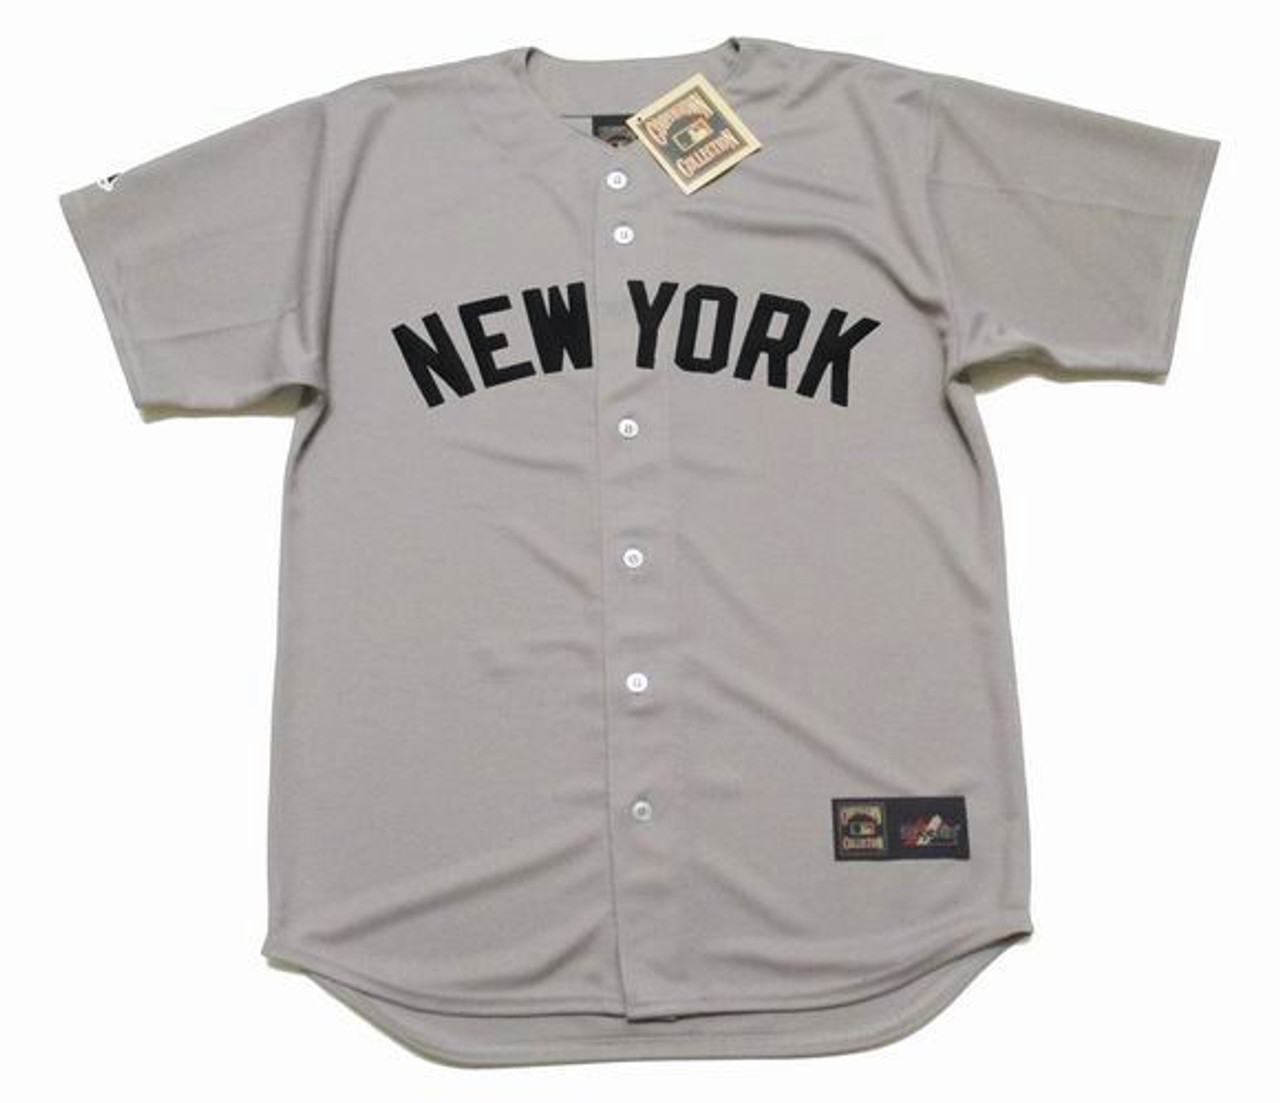 Collectible New York Yankees Jerseys for sale near San Diego